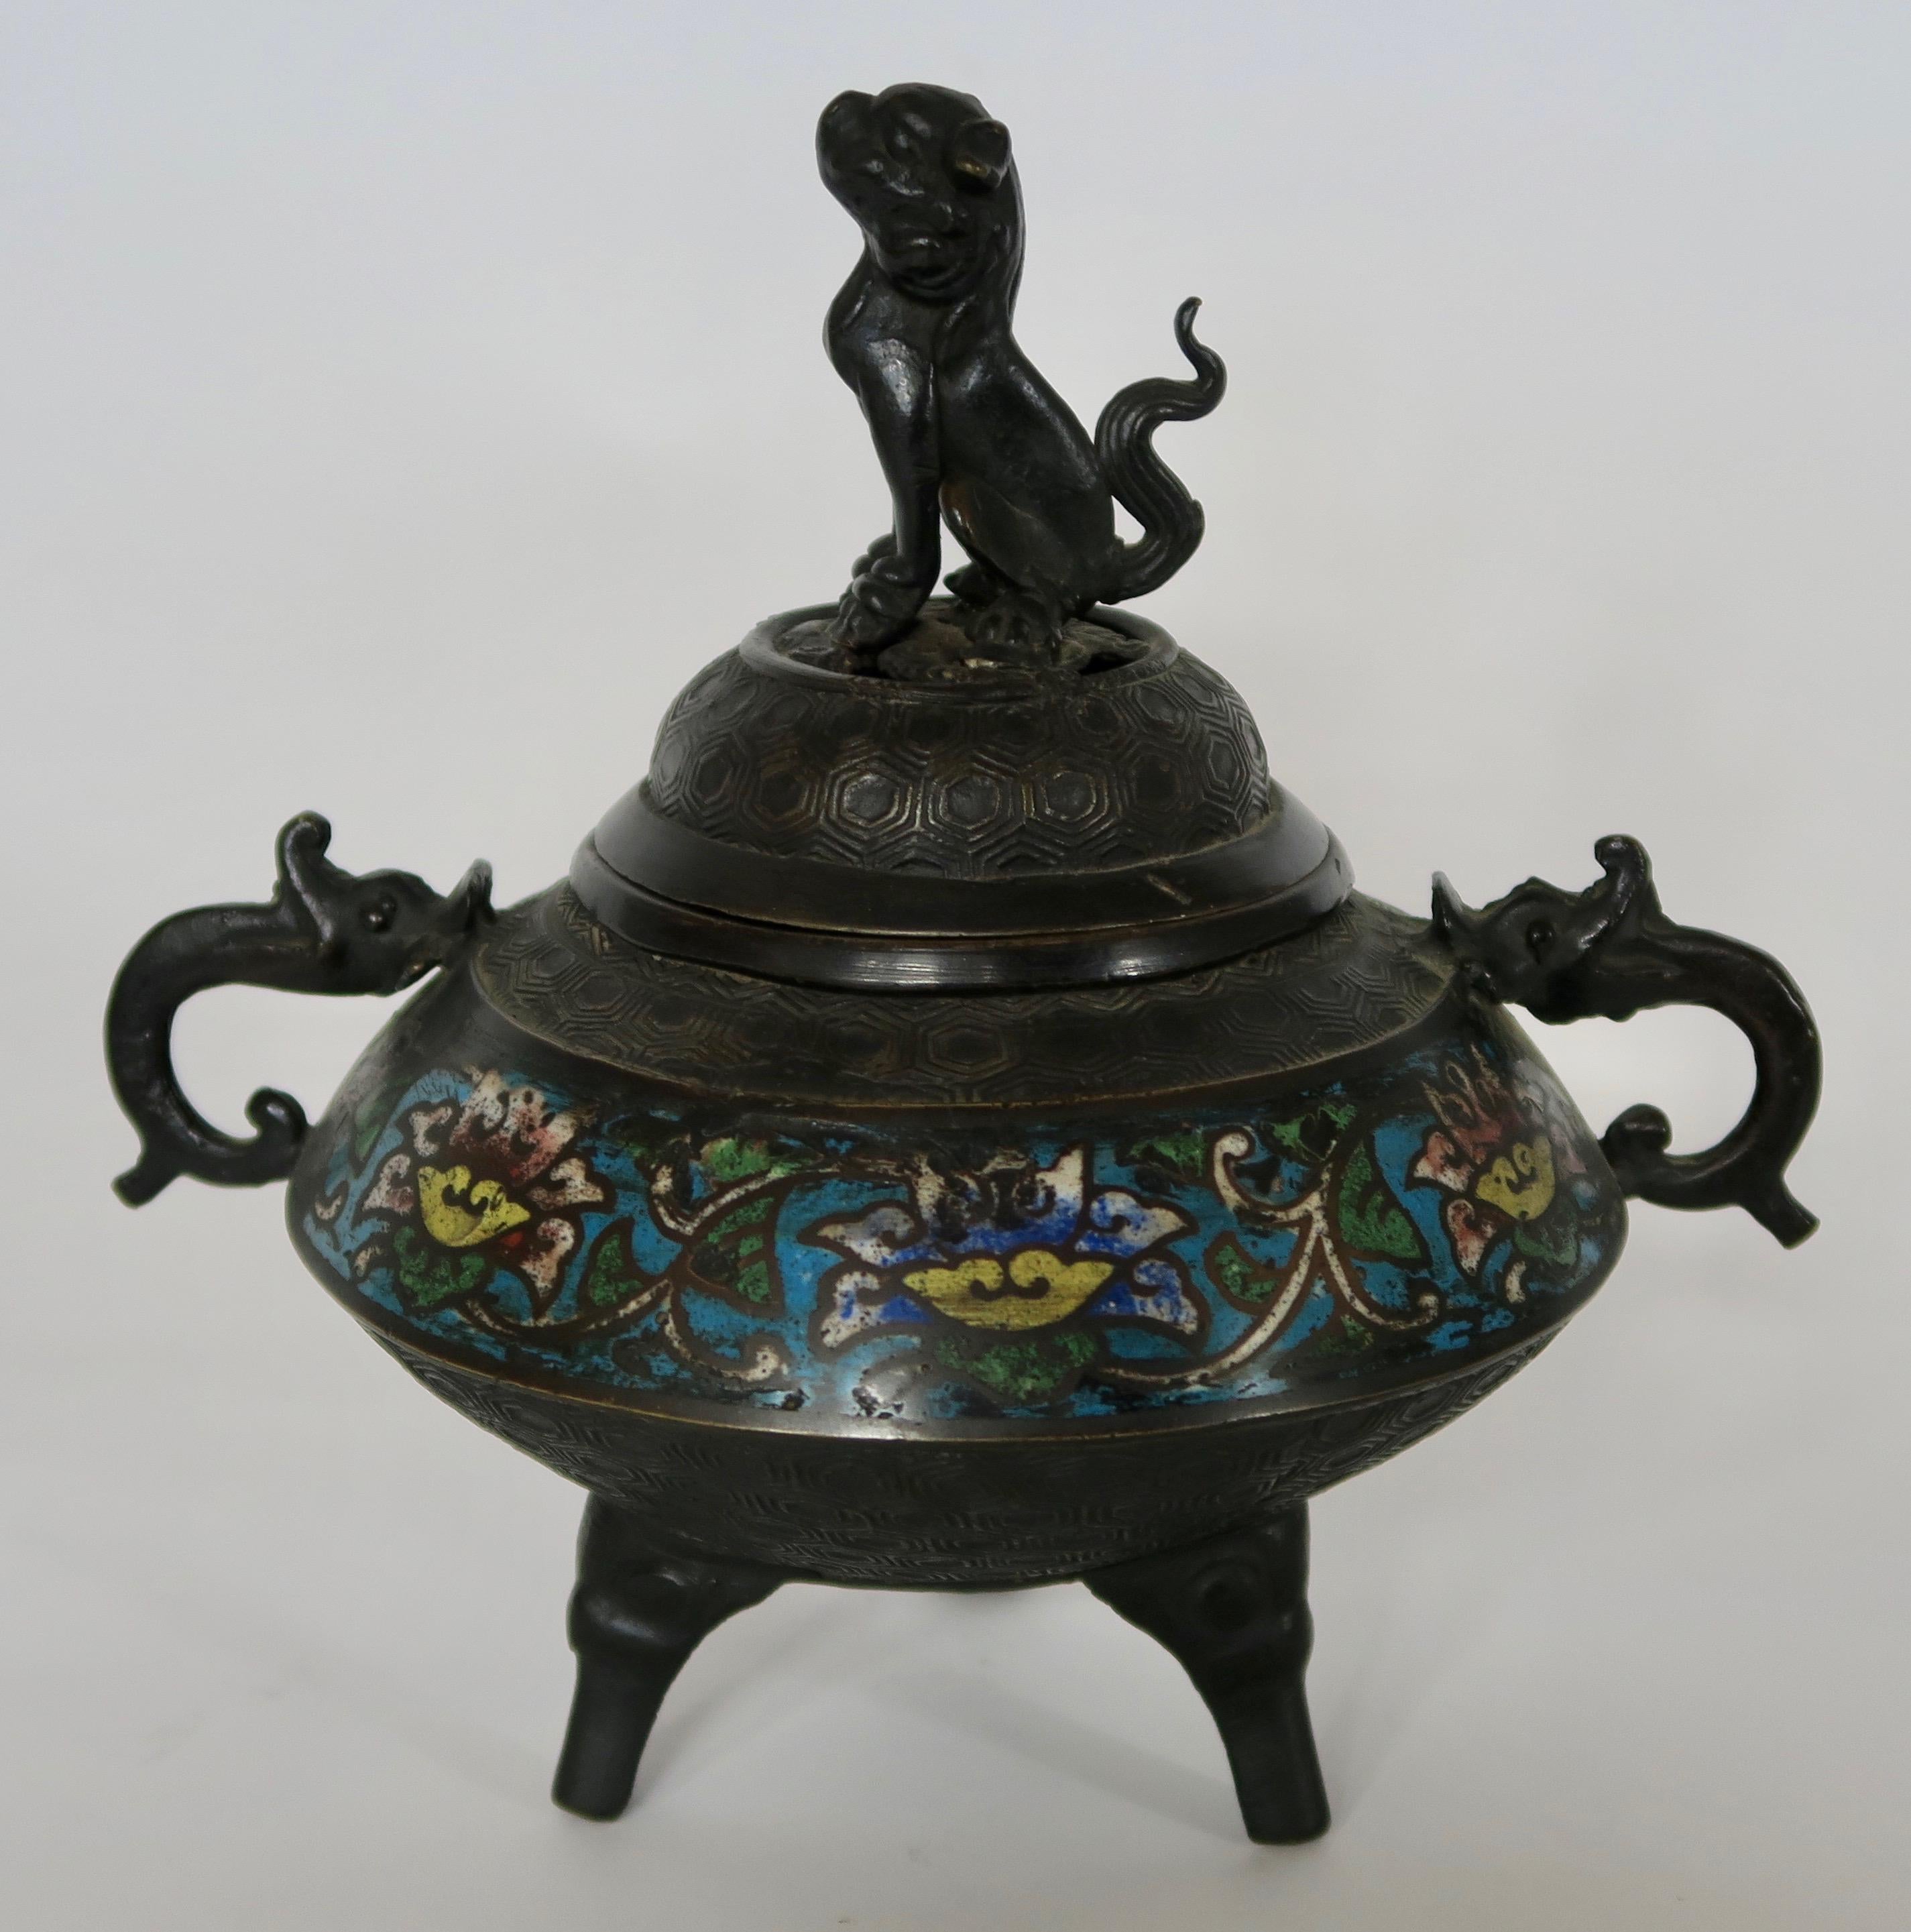 Dragon censer.
Period: late 19th century.
Very good quality finish.
Nice enameled decor colors and beautiful age patina.
Dimensions: Diameter 15 cm and 20 cm with the handles decor x height 20 cm.